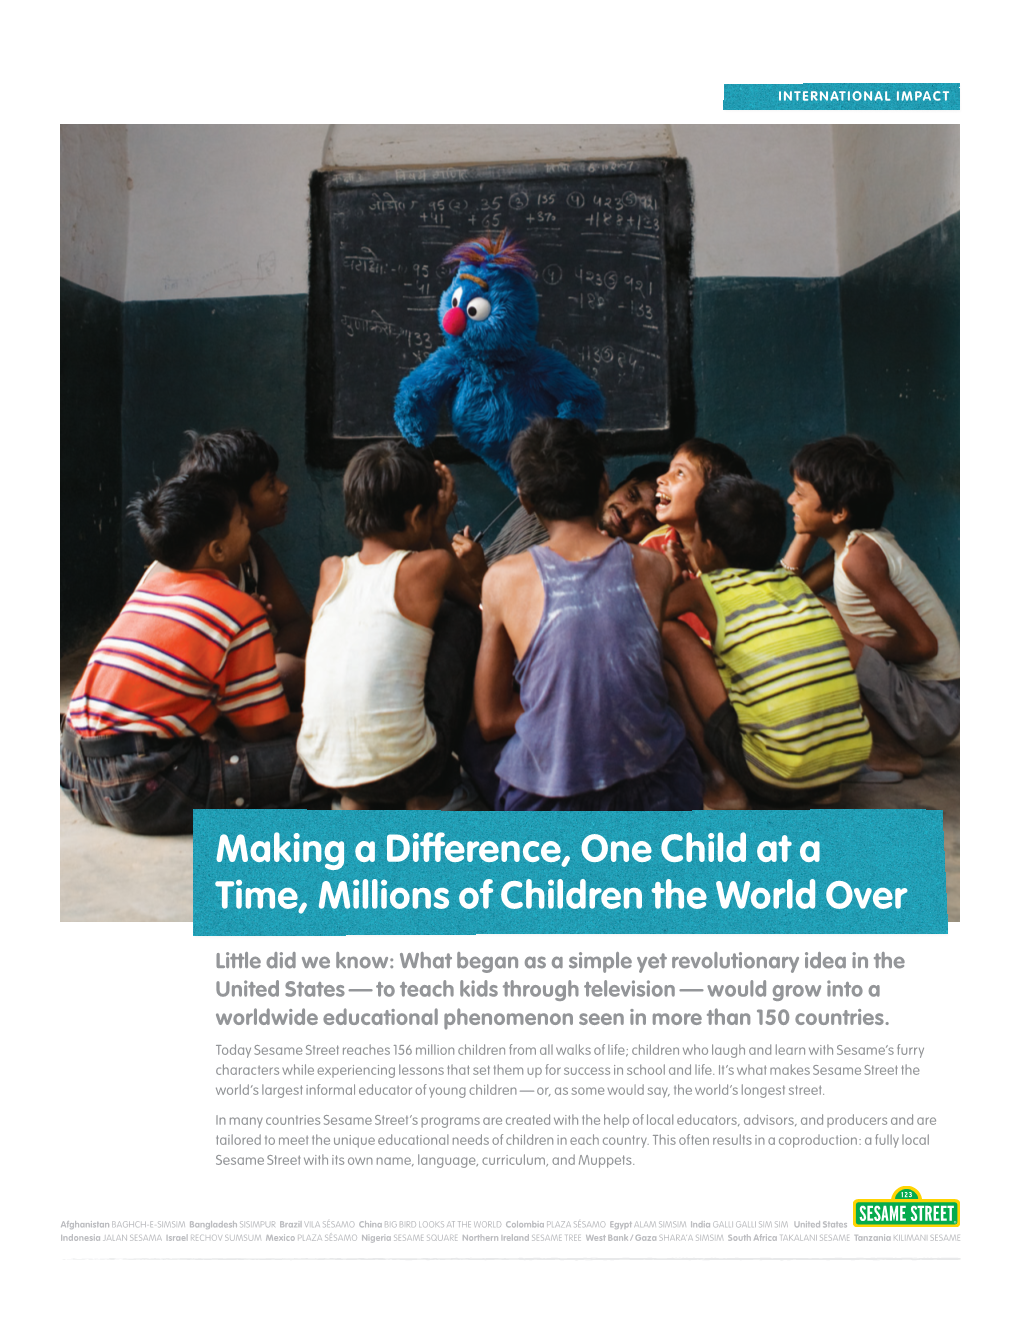 Making a Difference, One Child at a Time, Millions of Children the World Over